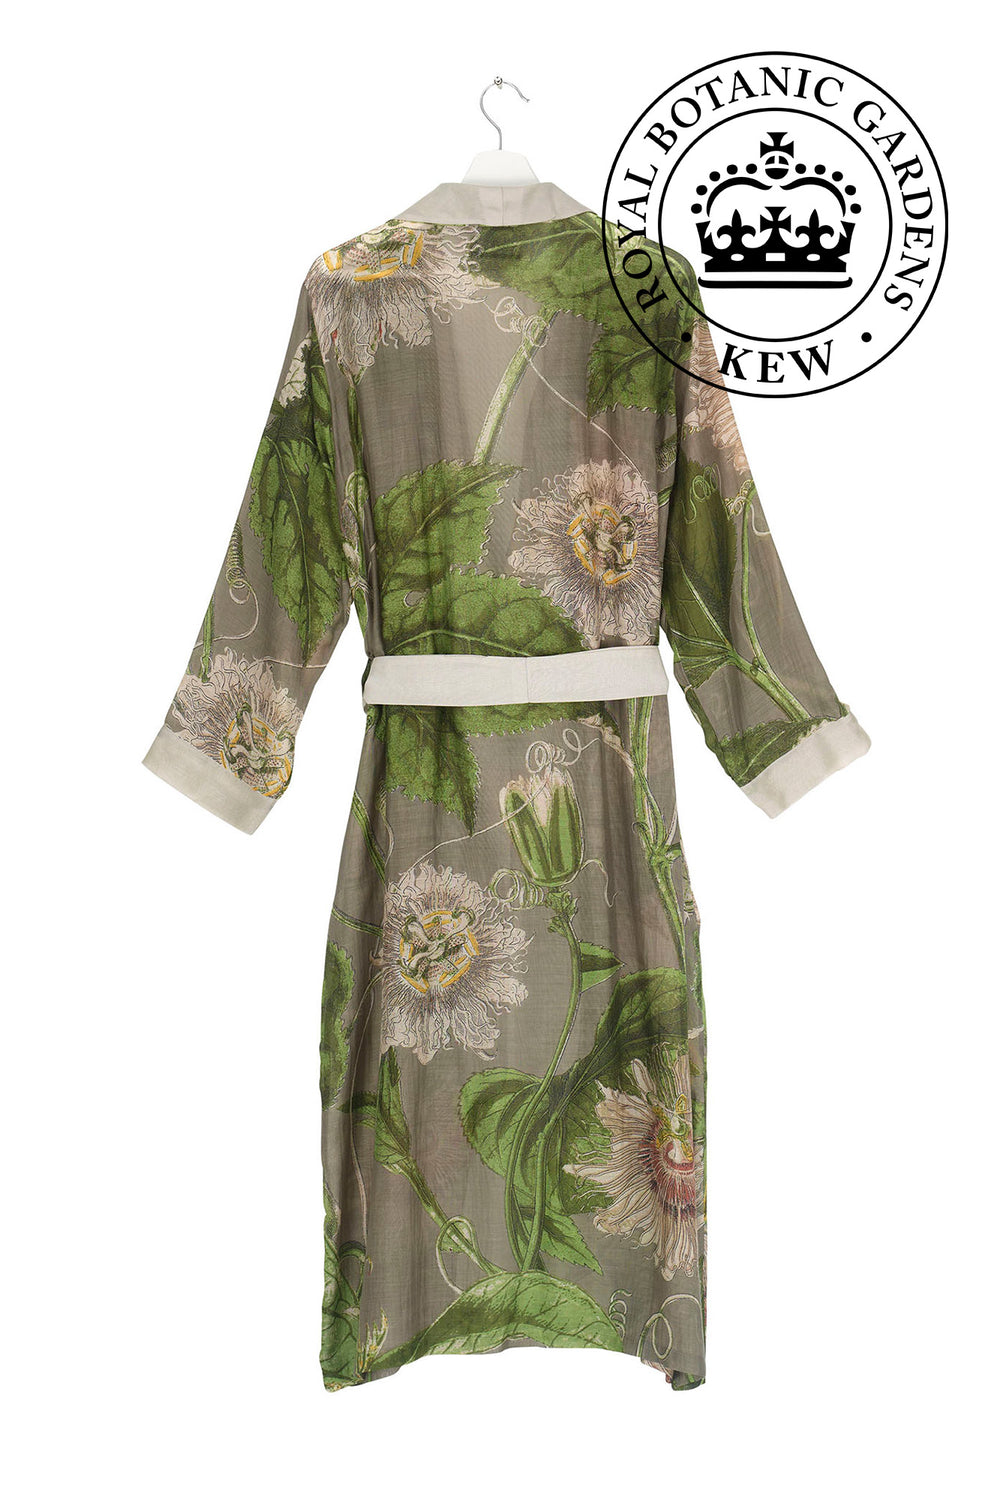 Passion Flower or 'Passiflora' Gown / Robe in Stone by One Hundred Stars in Collaboration with Kew, Royal Botanic Gardens. 